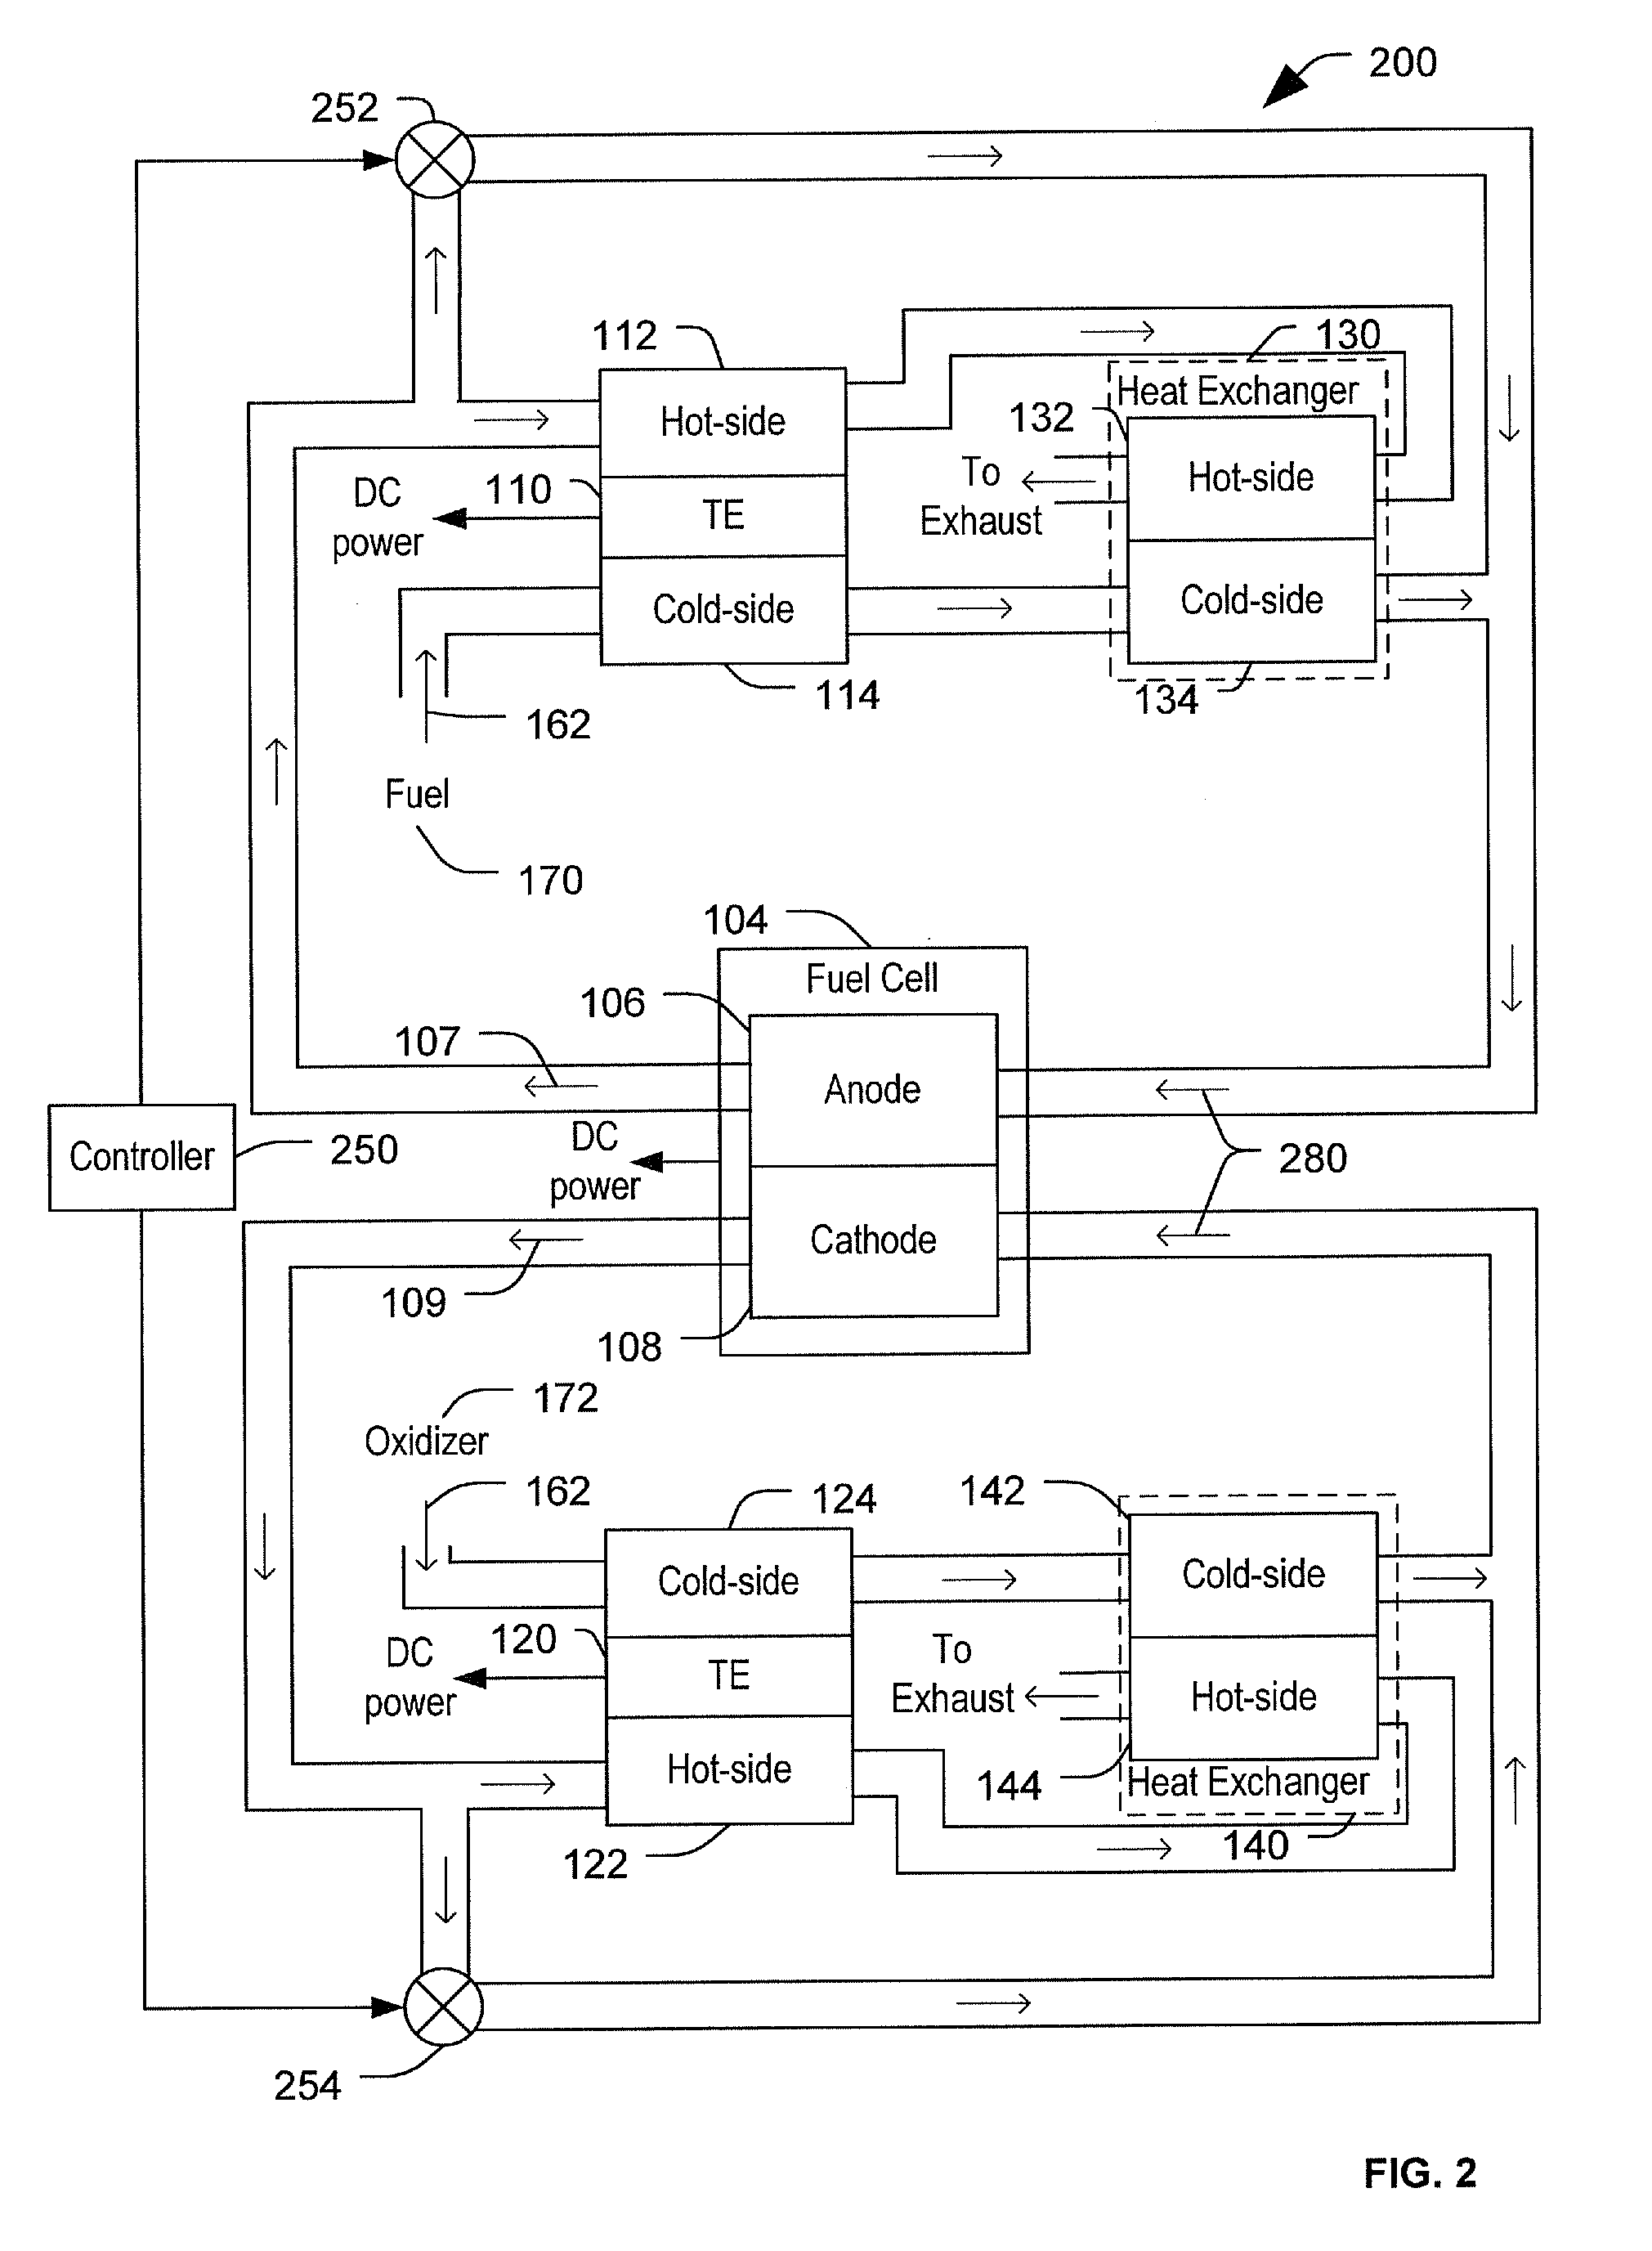 Thermoelectric generator and fuel cell for electric power co-generation